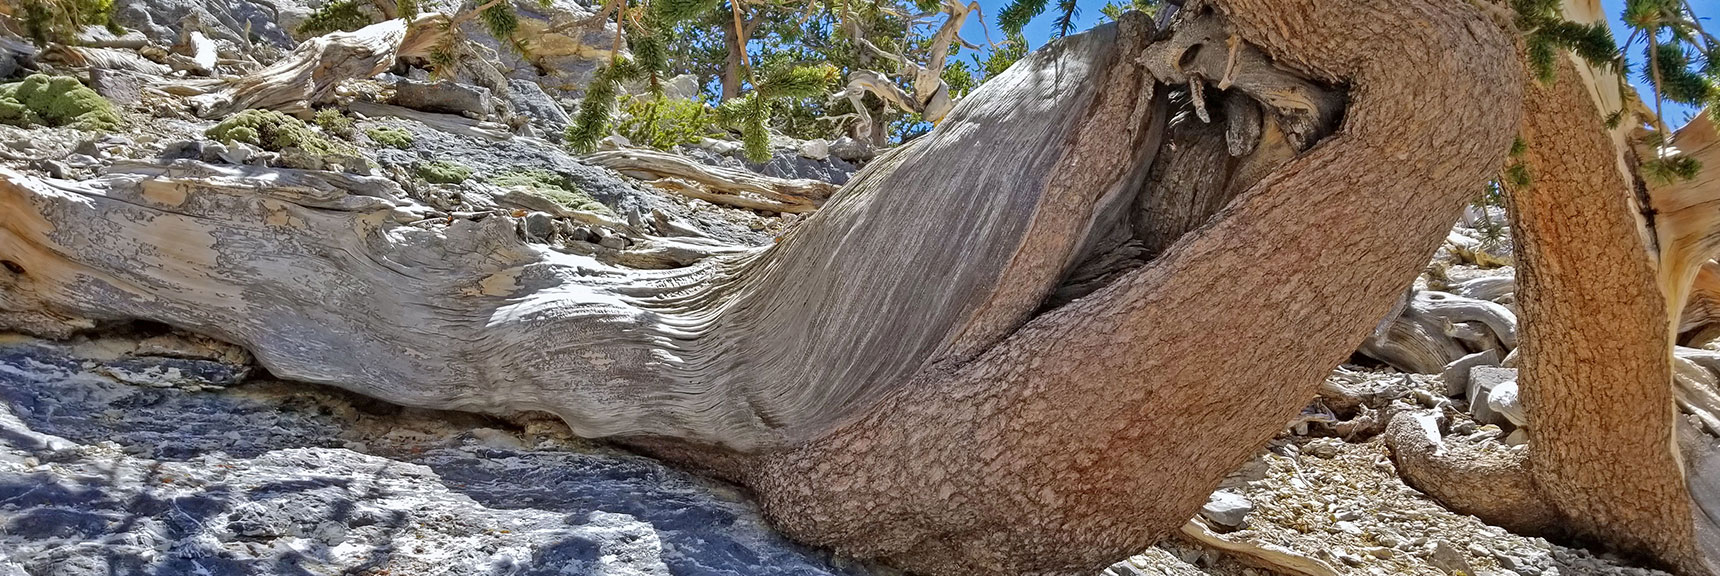 New Life Continues to Emerge from This Fallen Giant. | The Sisters South | Lee Canyon | Mt Charleston Wilderness | Spring Mountains, Nevada